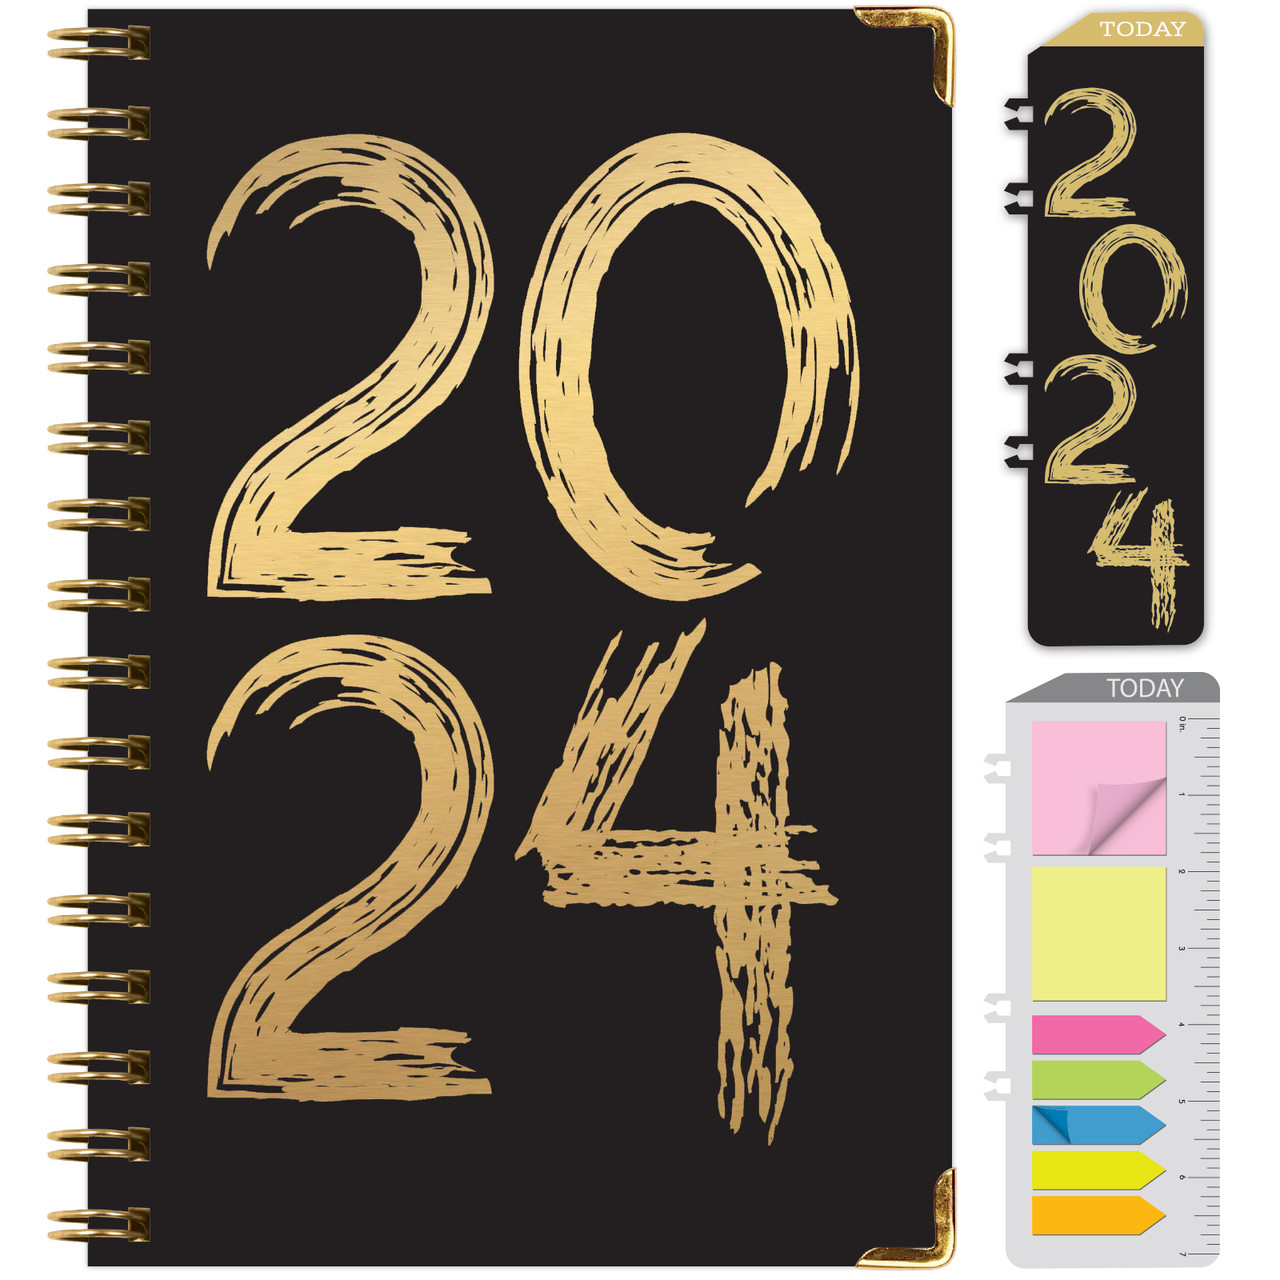 2024 Planner Weekly Agenda 2024 Agenda Weekly and Monthly 